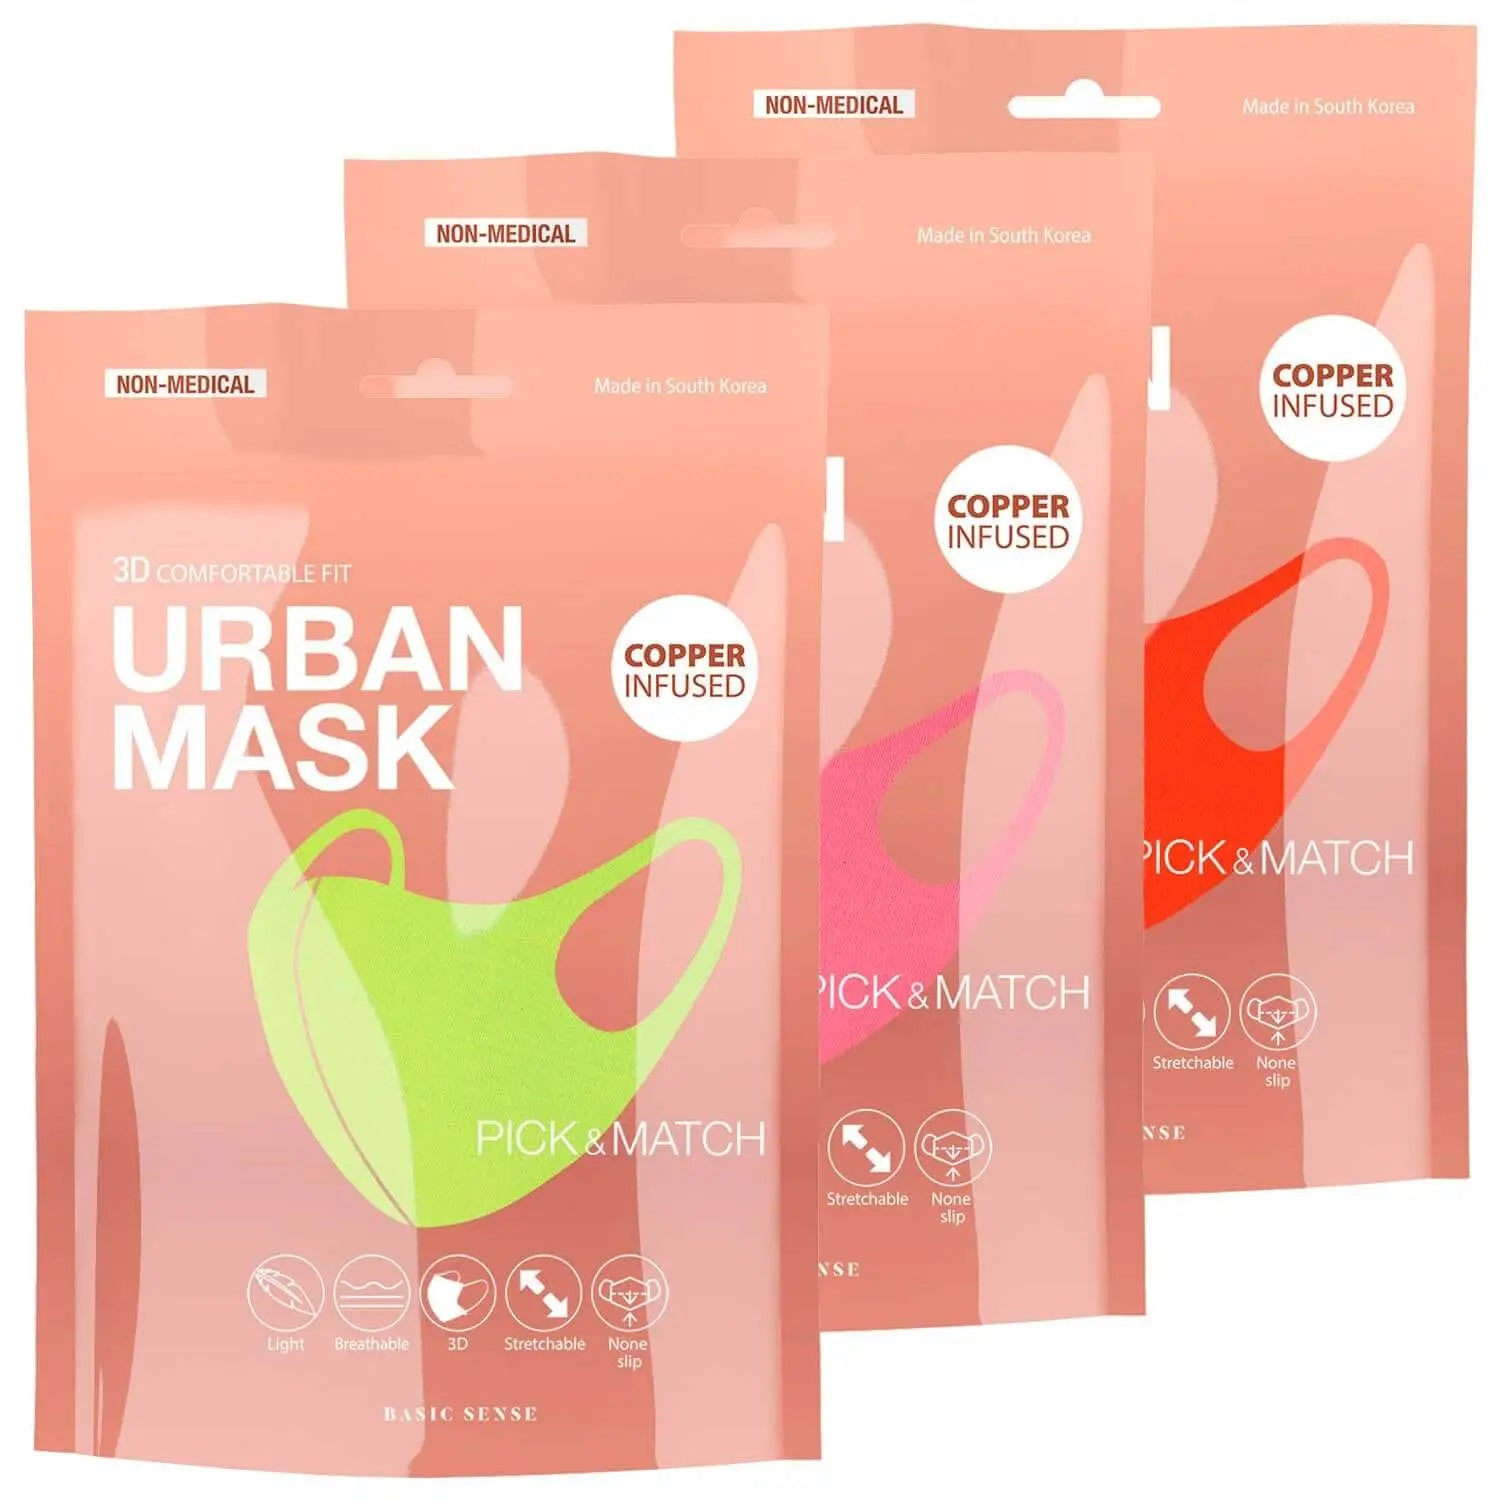 3 pack of copper infused face and neck mask masks for stylish protection in 3D Covering.